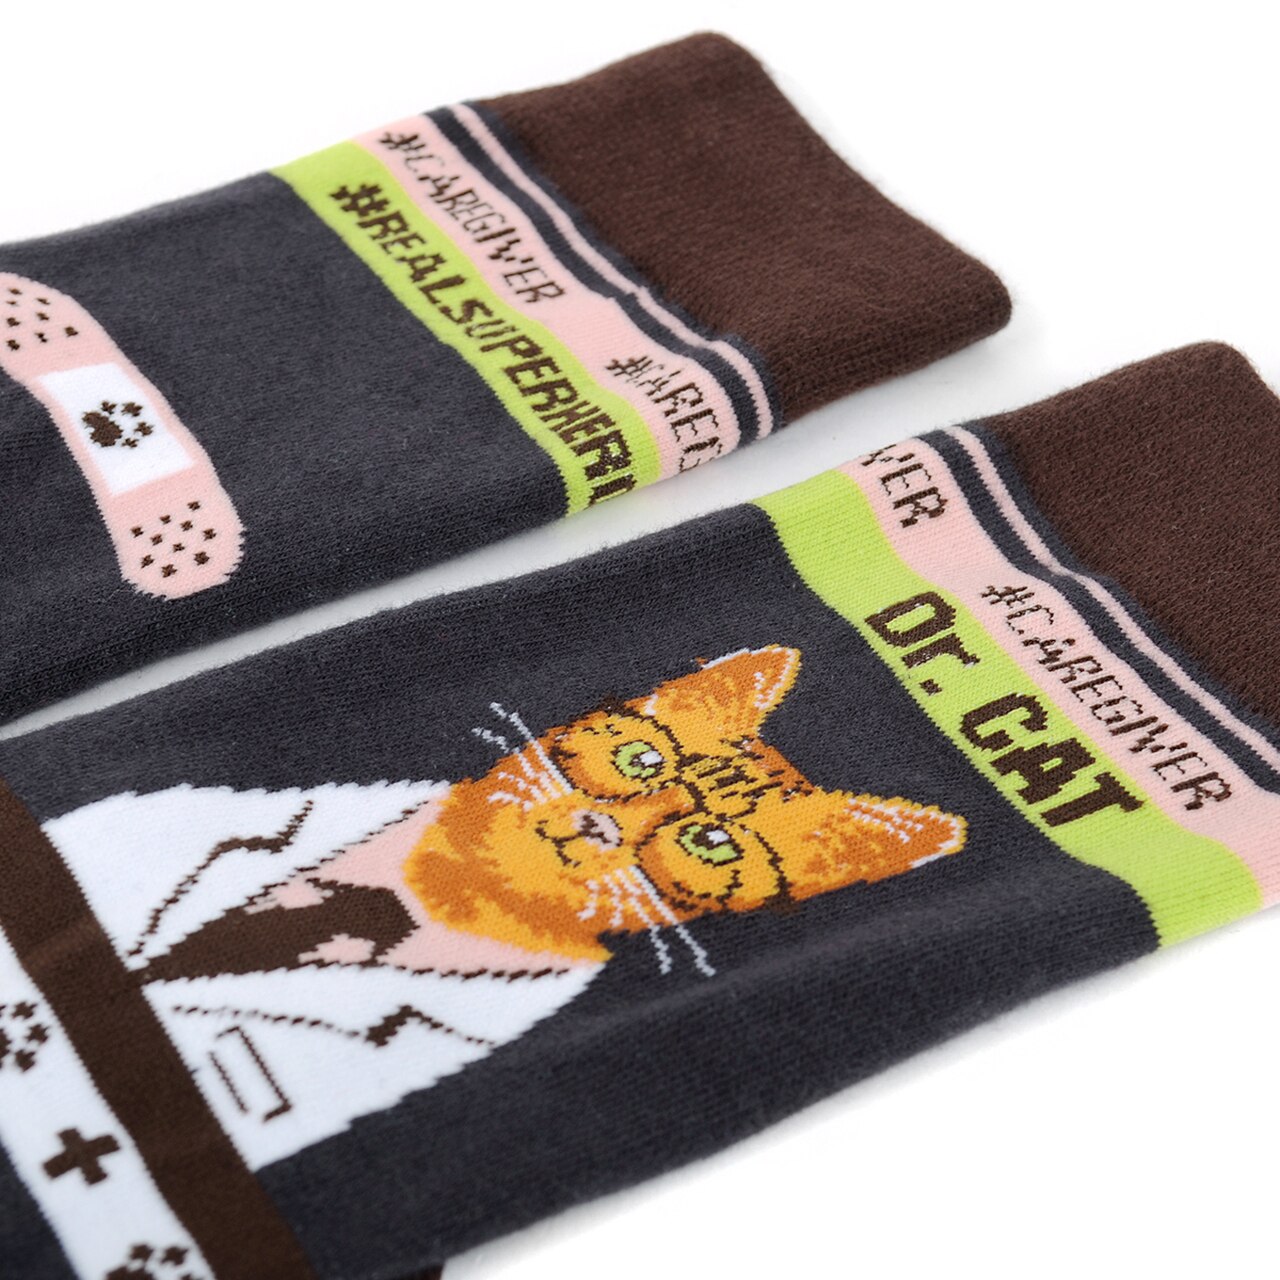 MashasCorner.com   Health Care Heroes -Dr. Cat- Ultra Premium Novelty Socks  Material: 68% cotton, 29% polyester, 3% spandex Sizes: available in S/M and L/XL S/M: men shoe size: 4.5-7.5, ladies shoe size: 5.5-9.5 L/XL: men shoe size: 8-12, ladies shoe size: 10-10.5 Unisex style